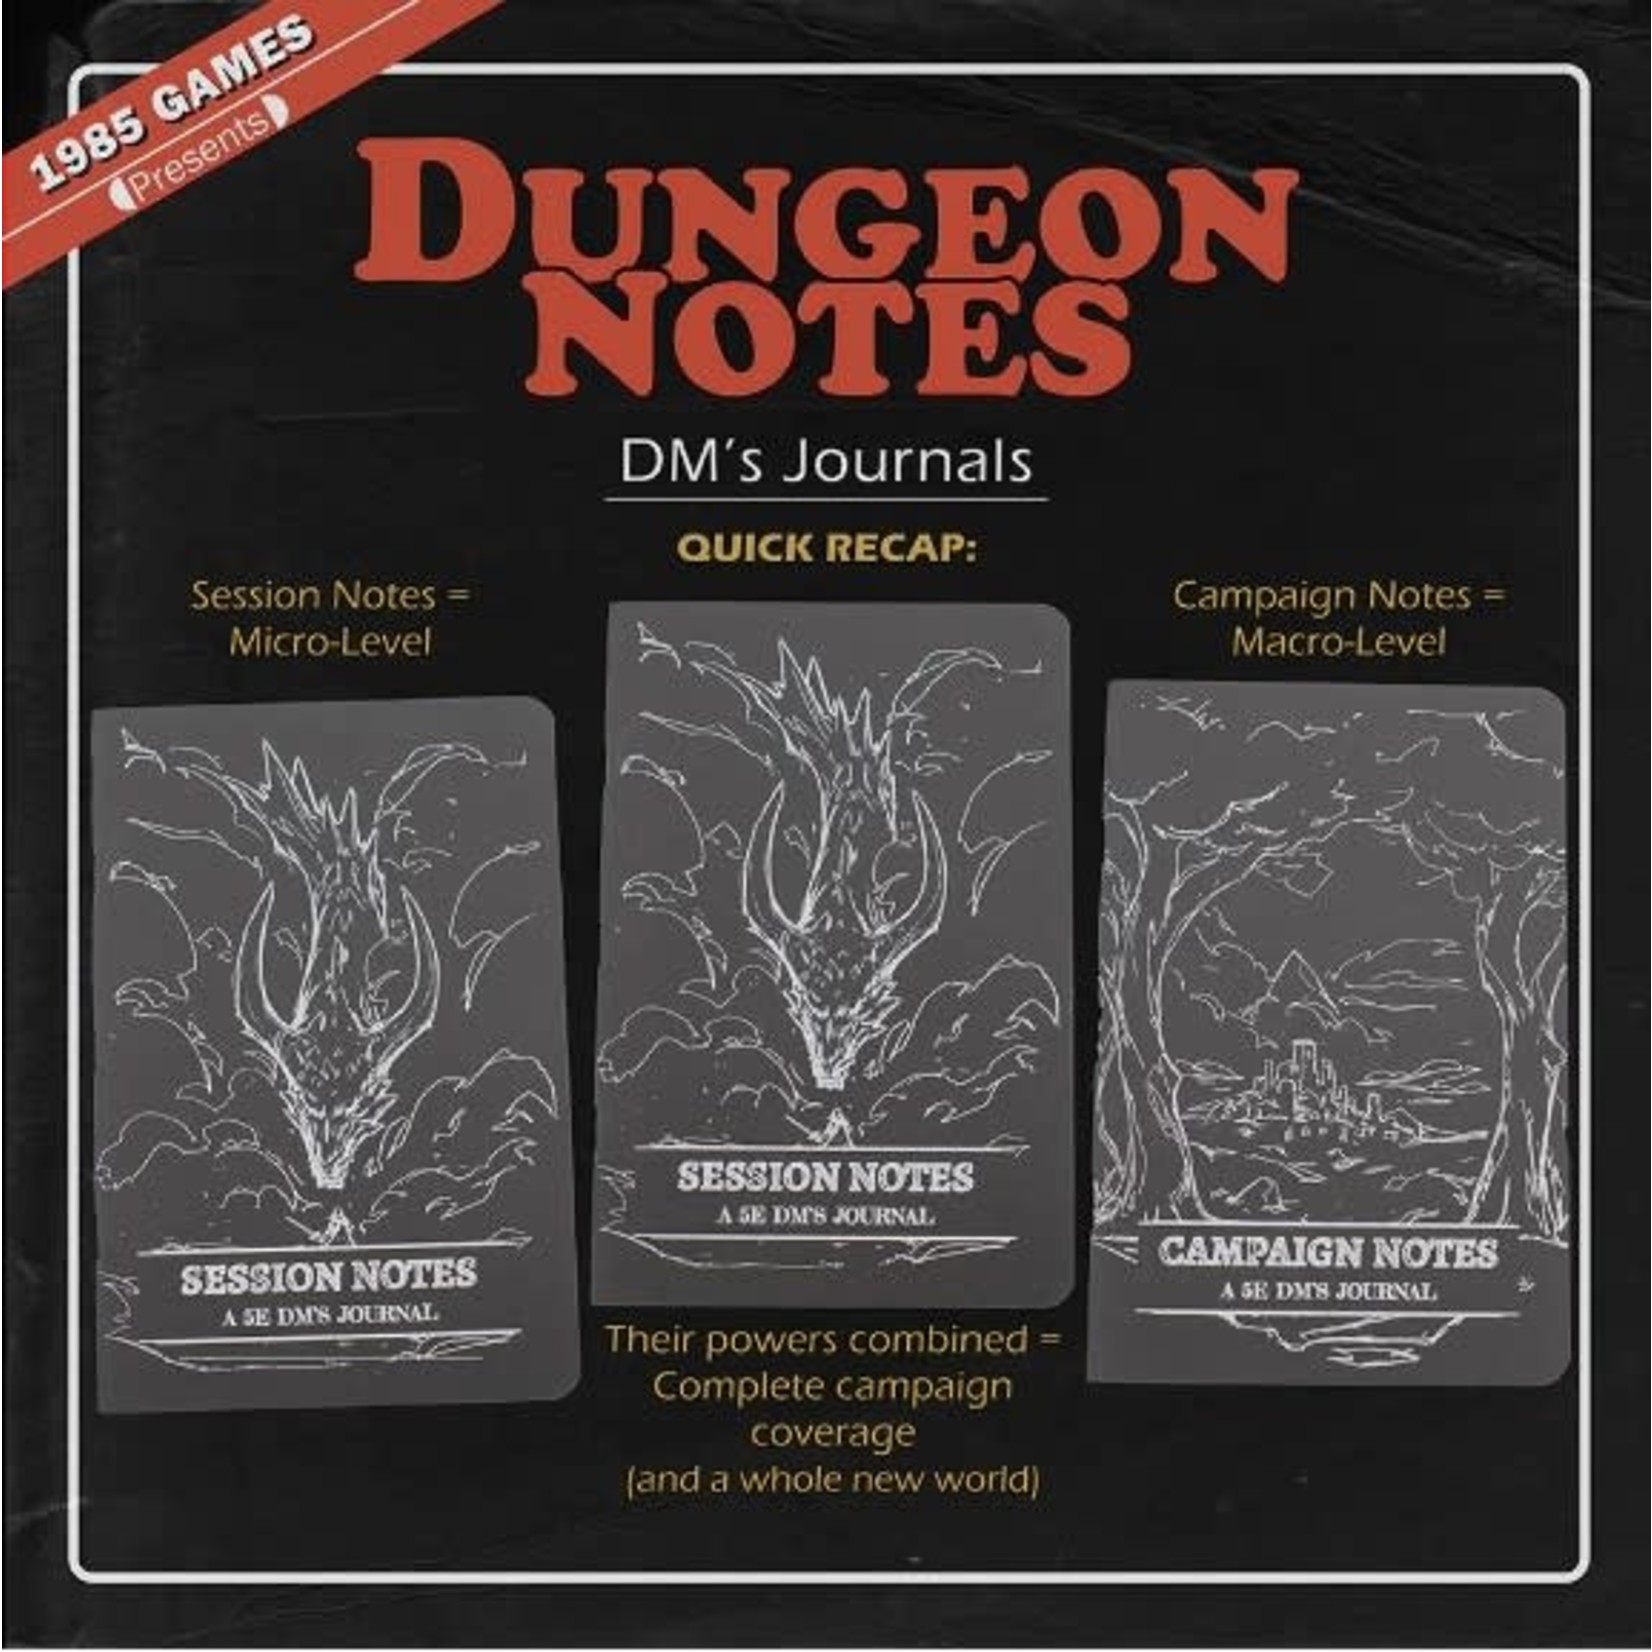 1985 Games Dungeon Notes: 5E DM's Journals (3 Pack)